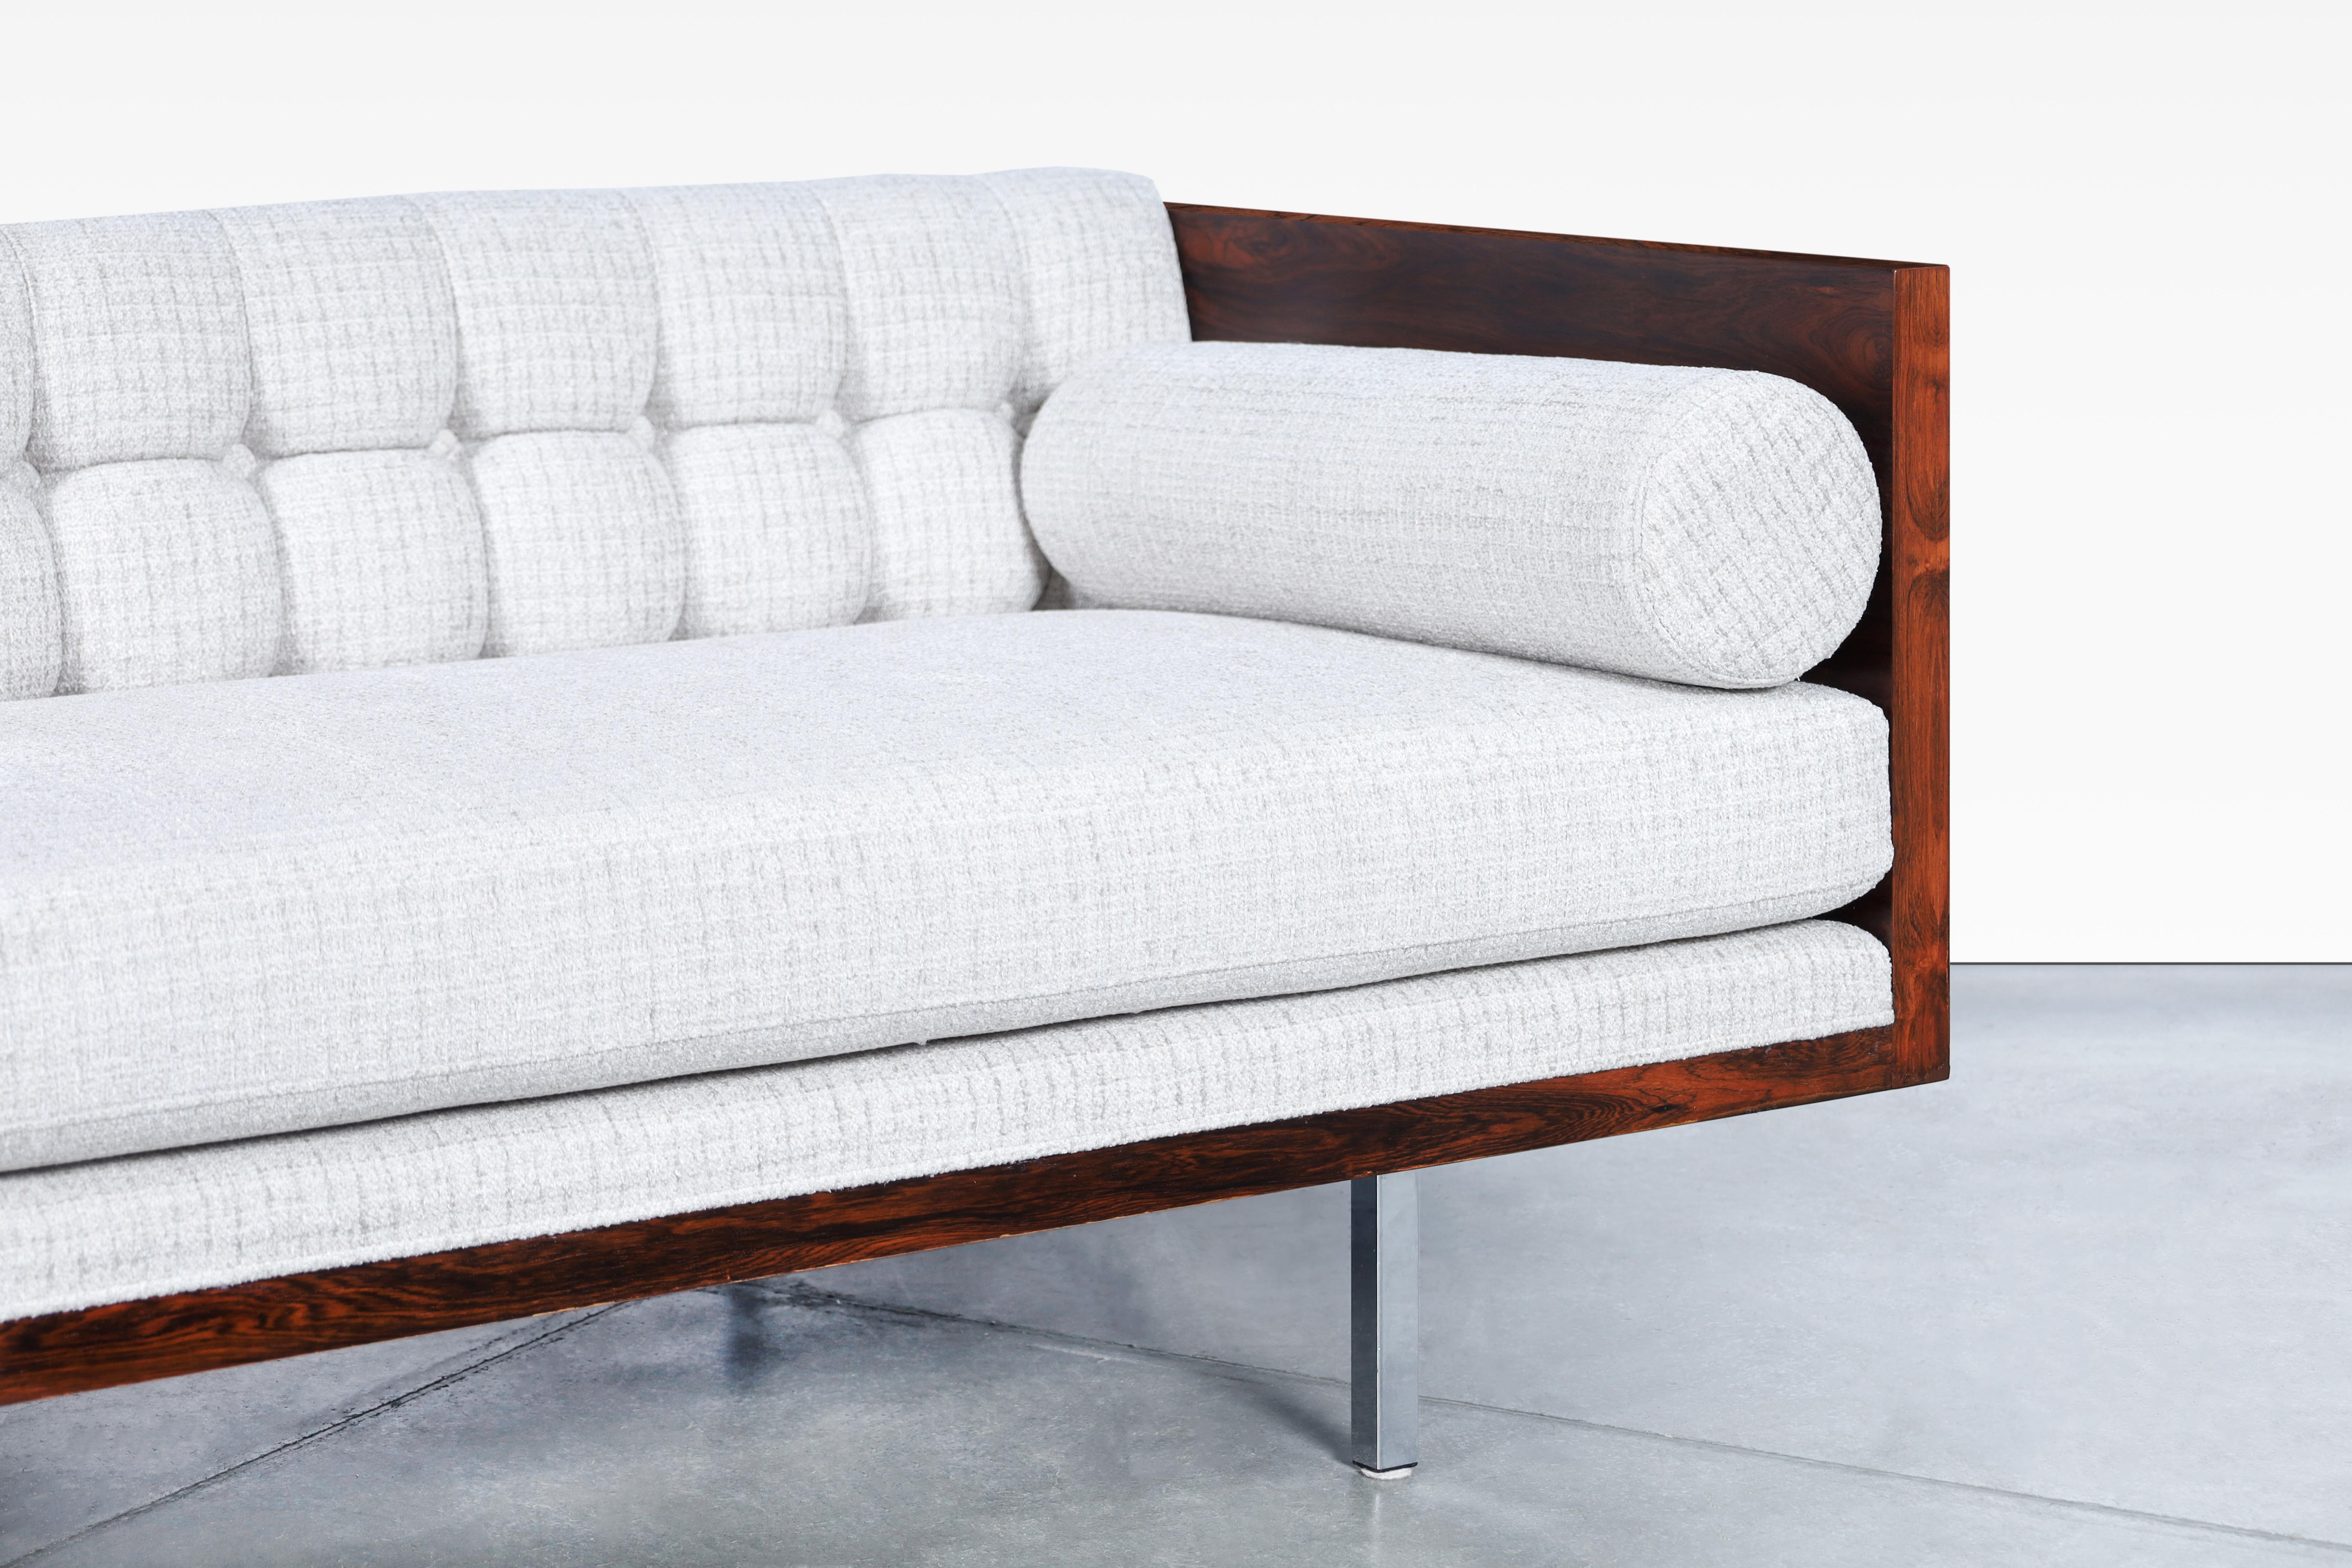 Mid-20th Century Vintage Brazilian Rosewood Case Sofa by Milo Baughman for Thayer Coggin For Sale